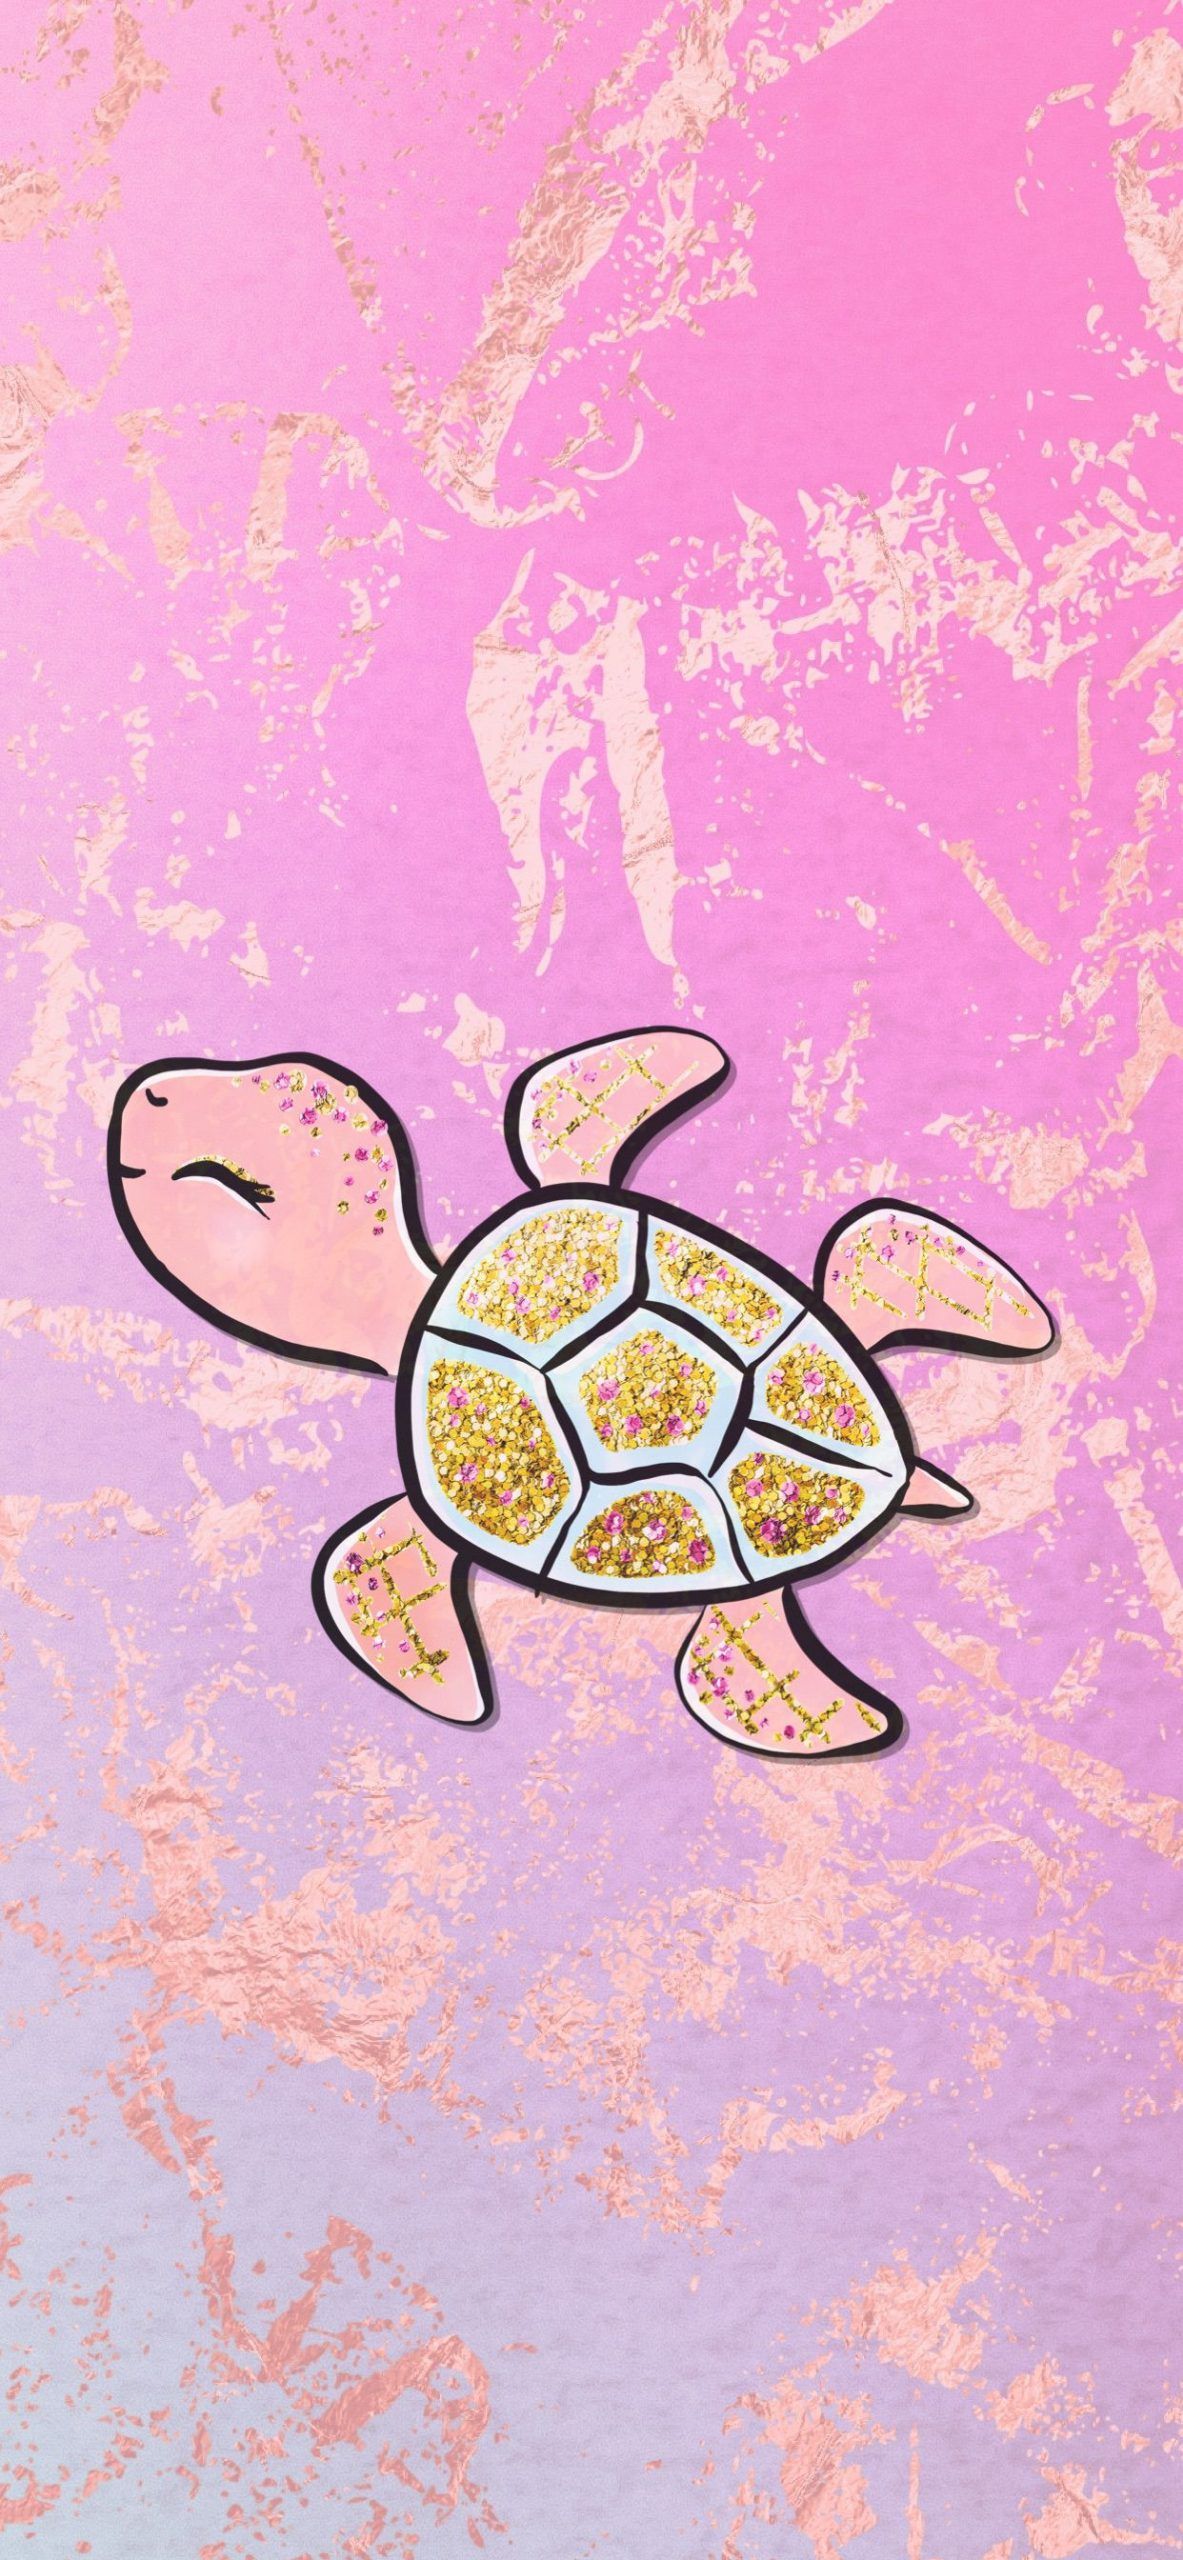 A pink and gold sea turtle illustration on a pink and gold background - Sea turtle, turtle